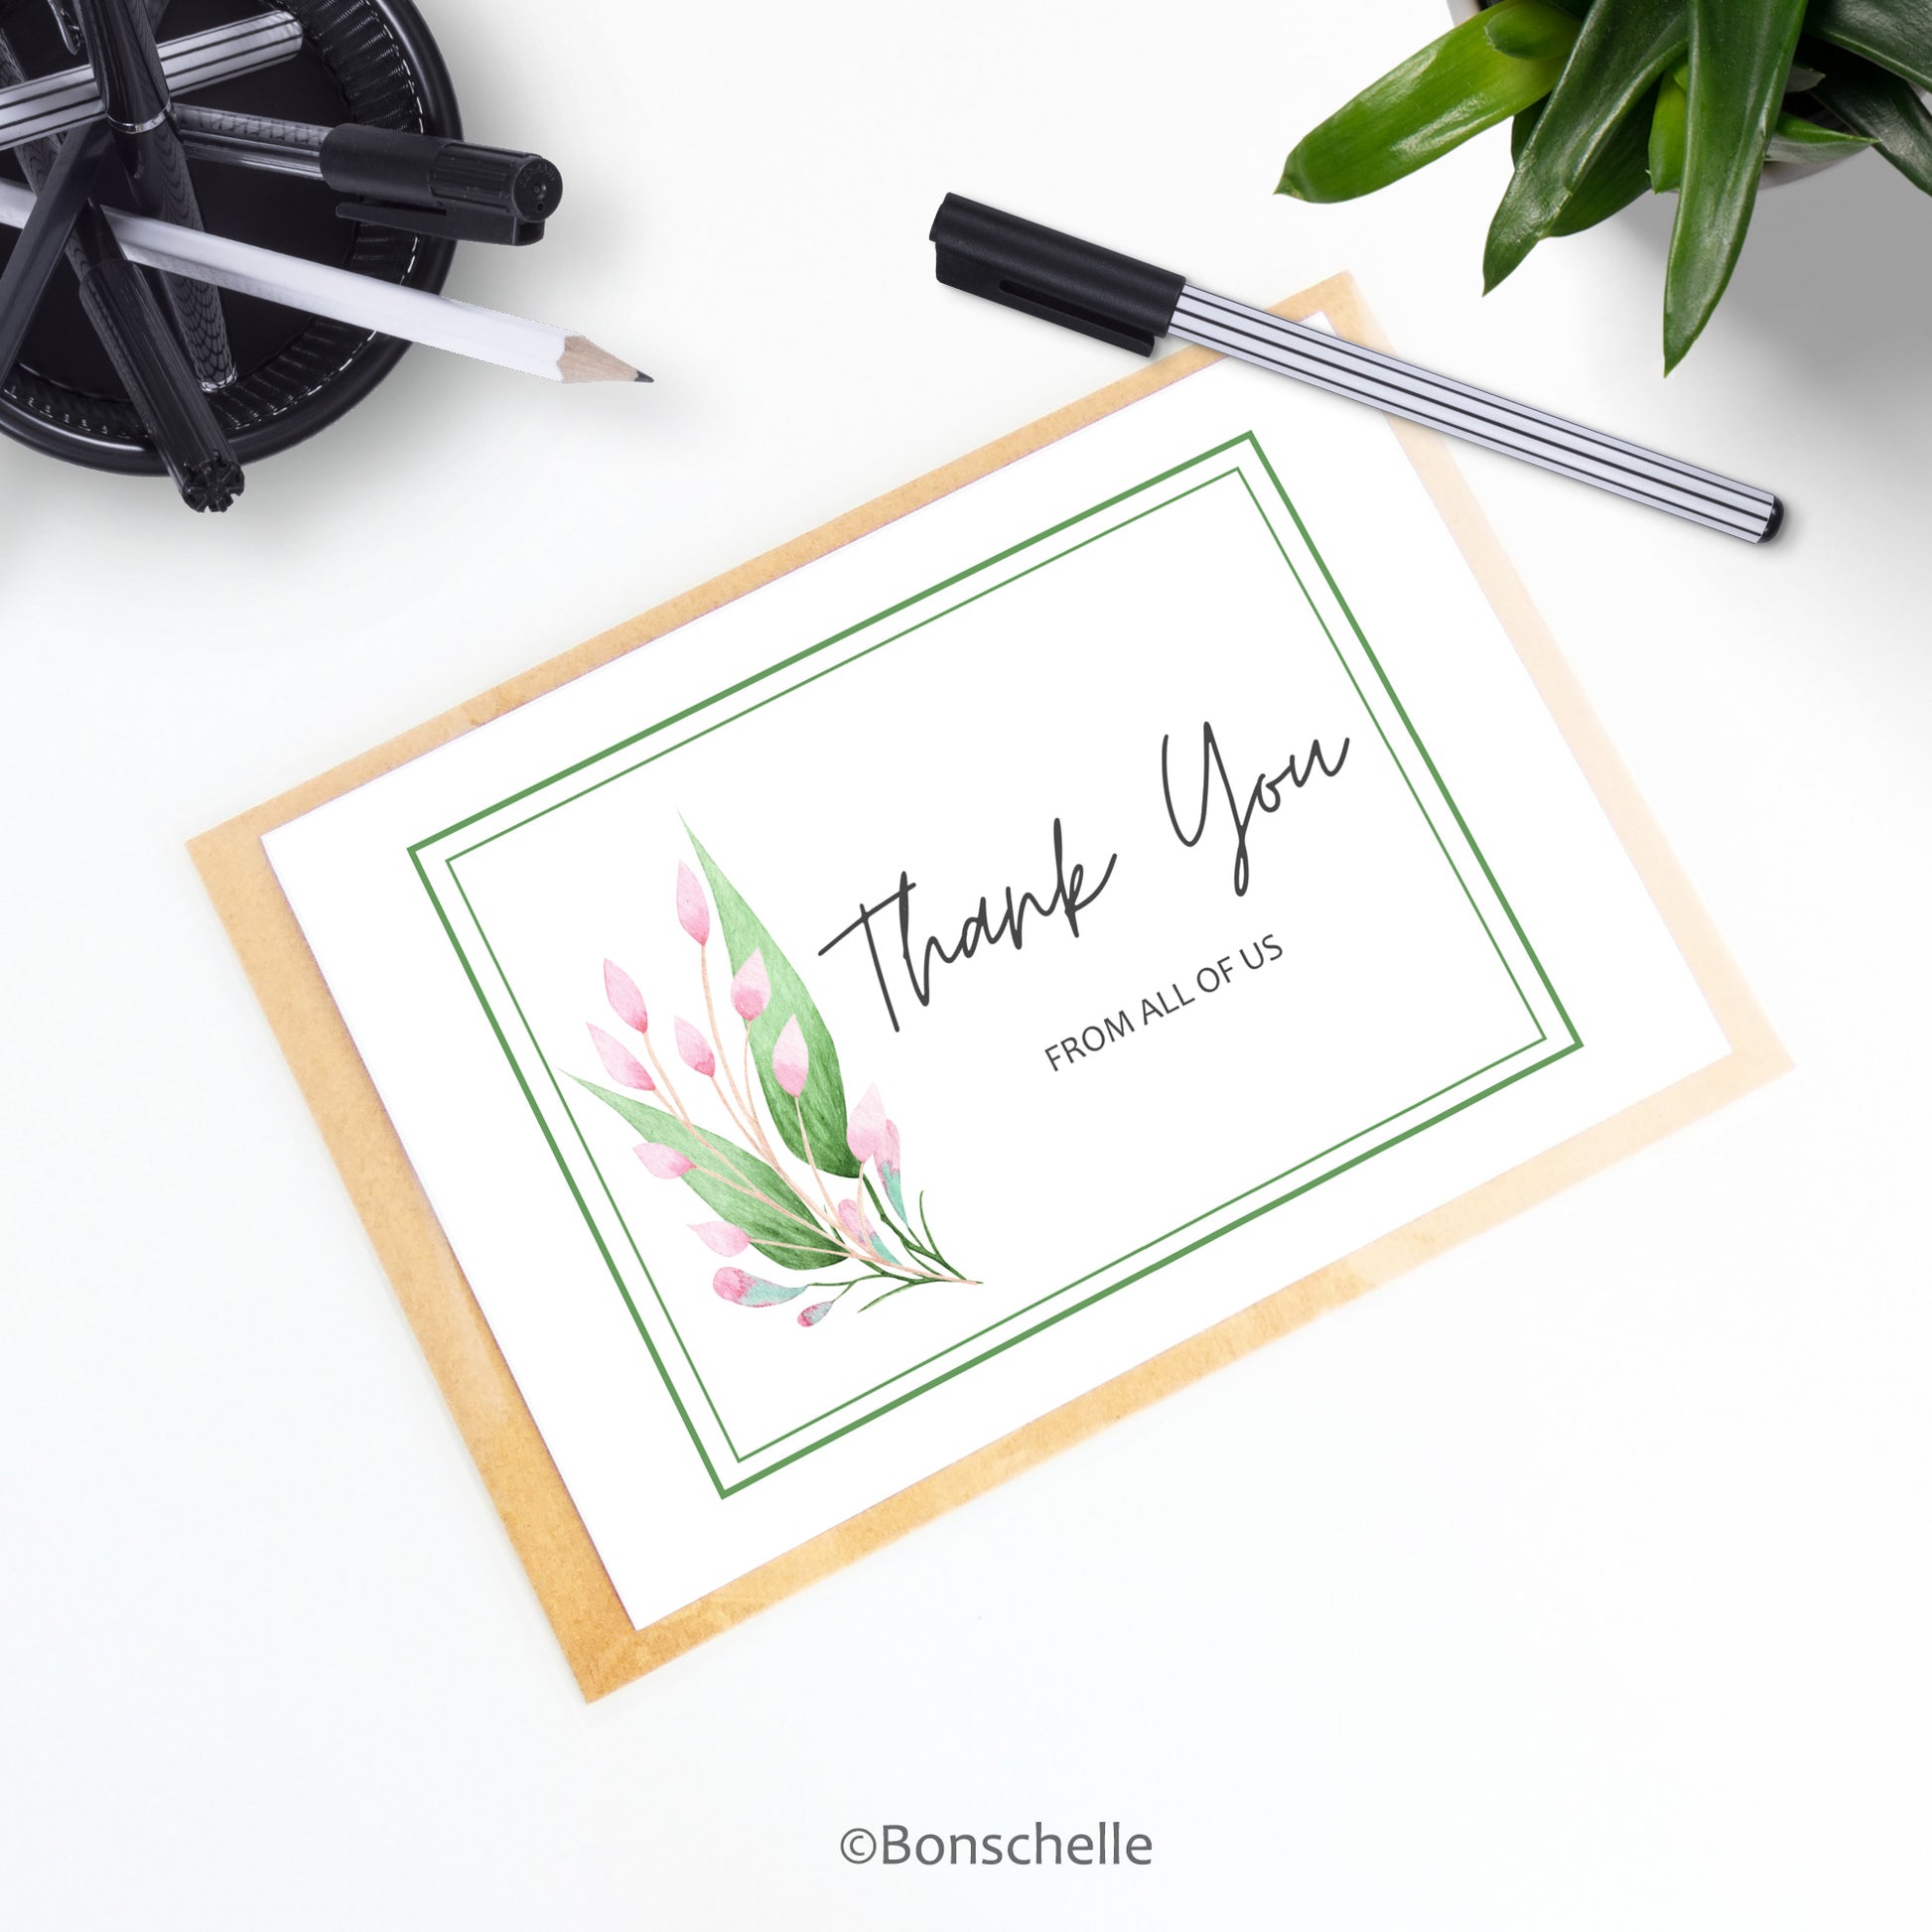 Handmade personalised Thank you card with pink buds and green leaves and custom text under the words 'Thank You. Floral blank inside thank you greeting card shown with a brown envelope on a desk